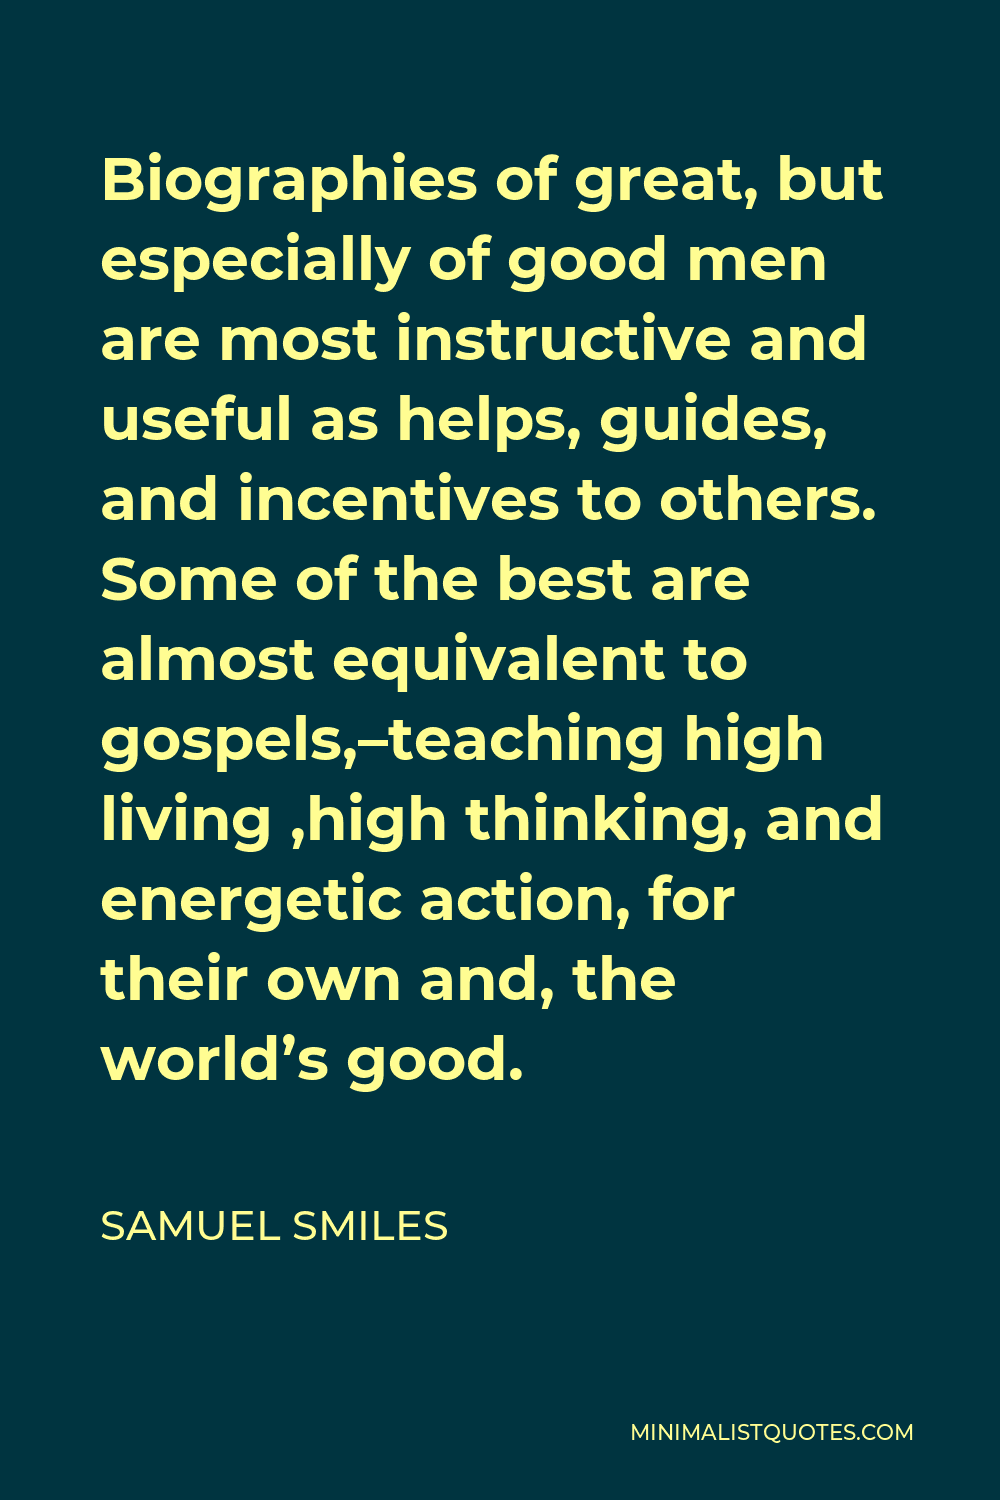 Samuel Smiles Quote - Biographies of great, but especially of good men are most instructive and useful as helps, guides, and incentives to others. Some of the best are almost equivalent to gospels,–teaching high living ,high thinking, and energetic action, for their own and, the world’s good.